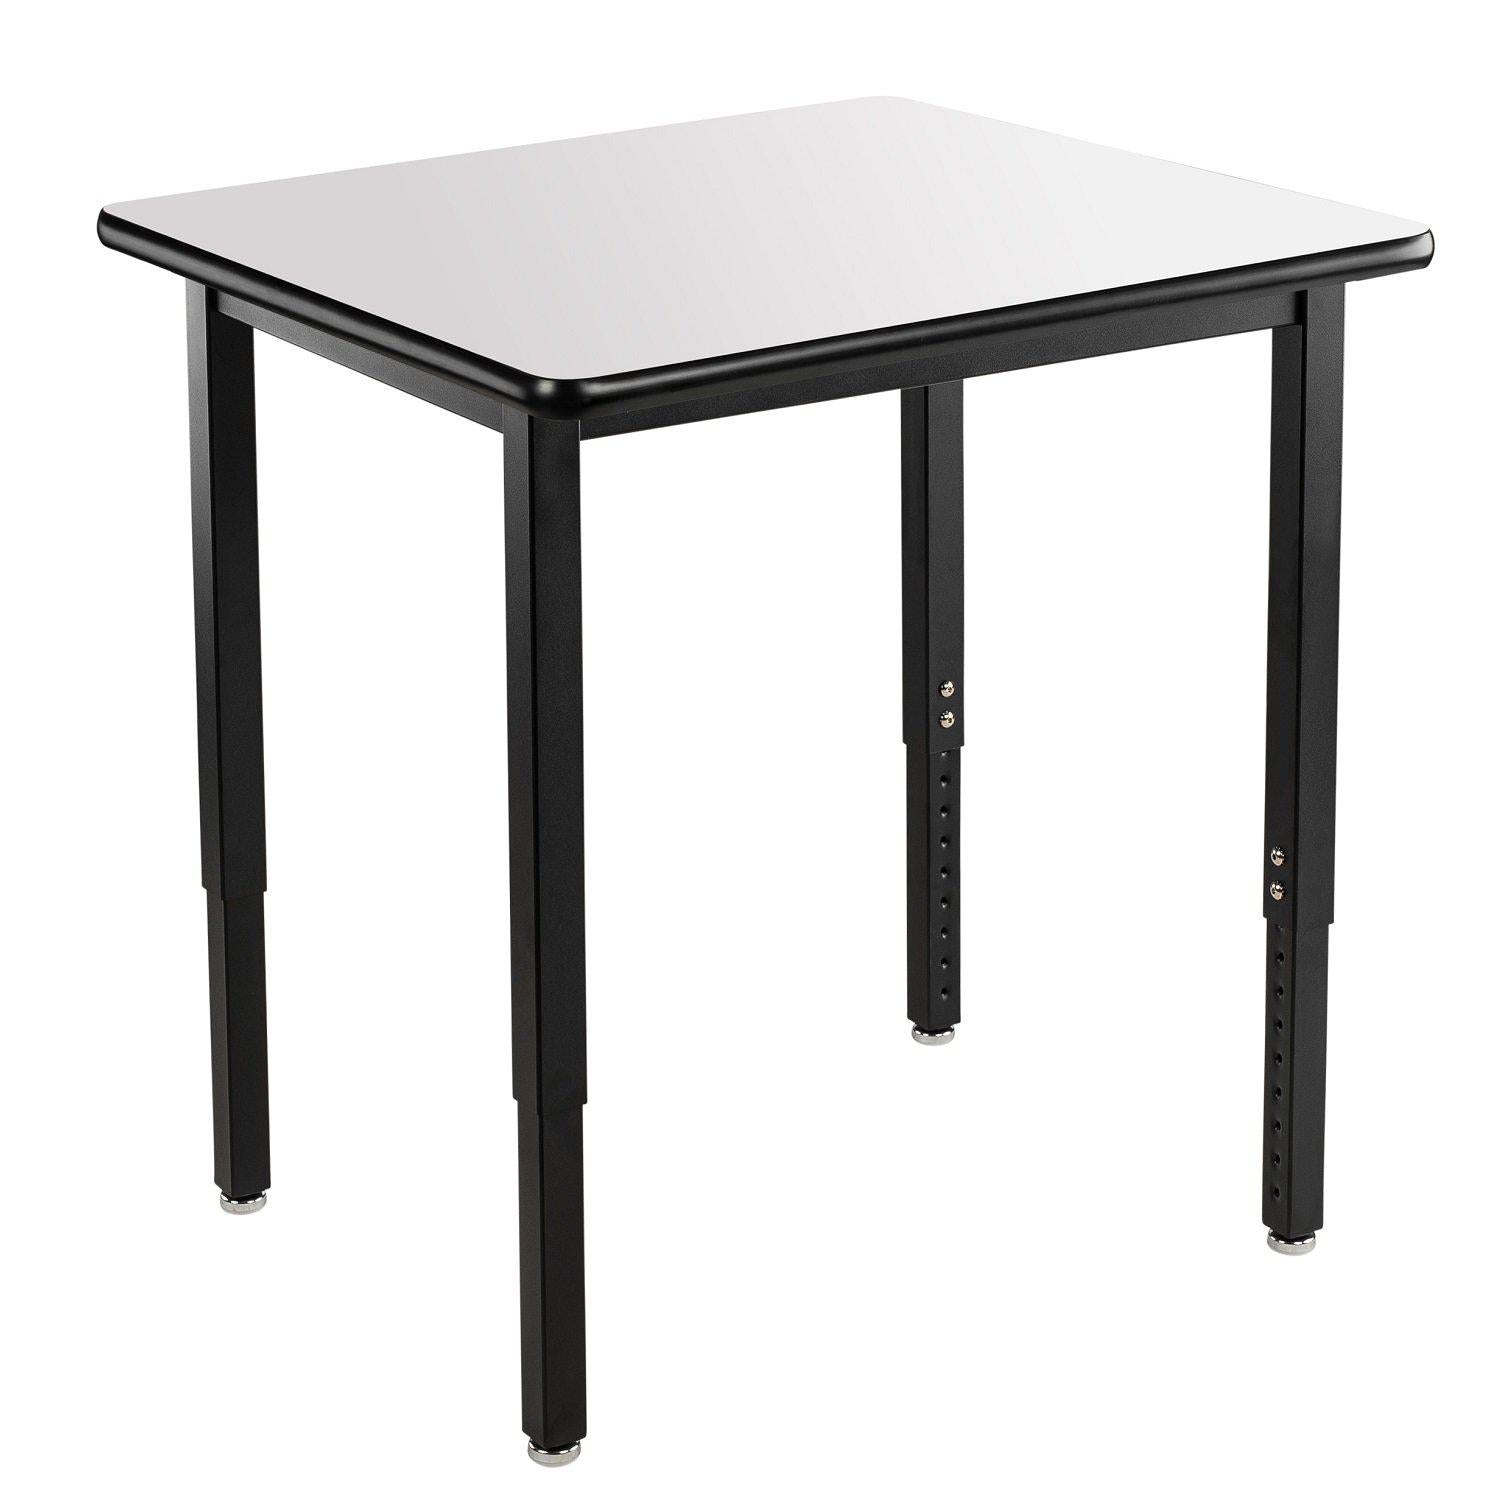 Heavy-Duty Height-Adjustable Utility Table, Black Frame, 24" x 36", Whiteboard High-Pressure Laminate Top